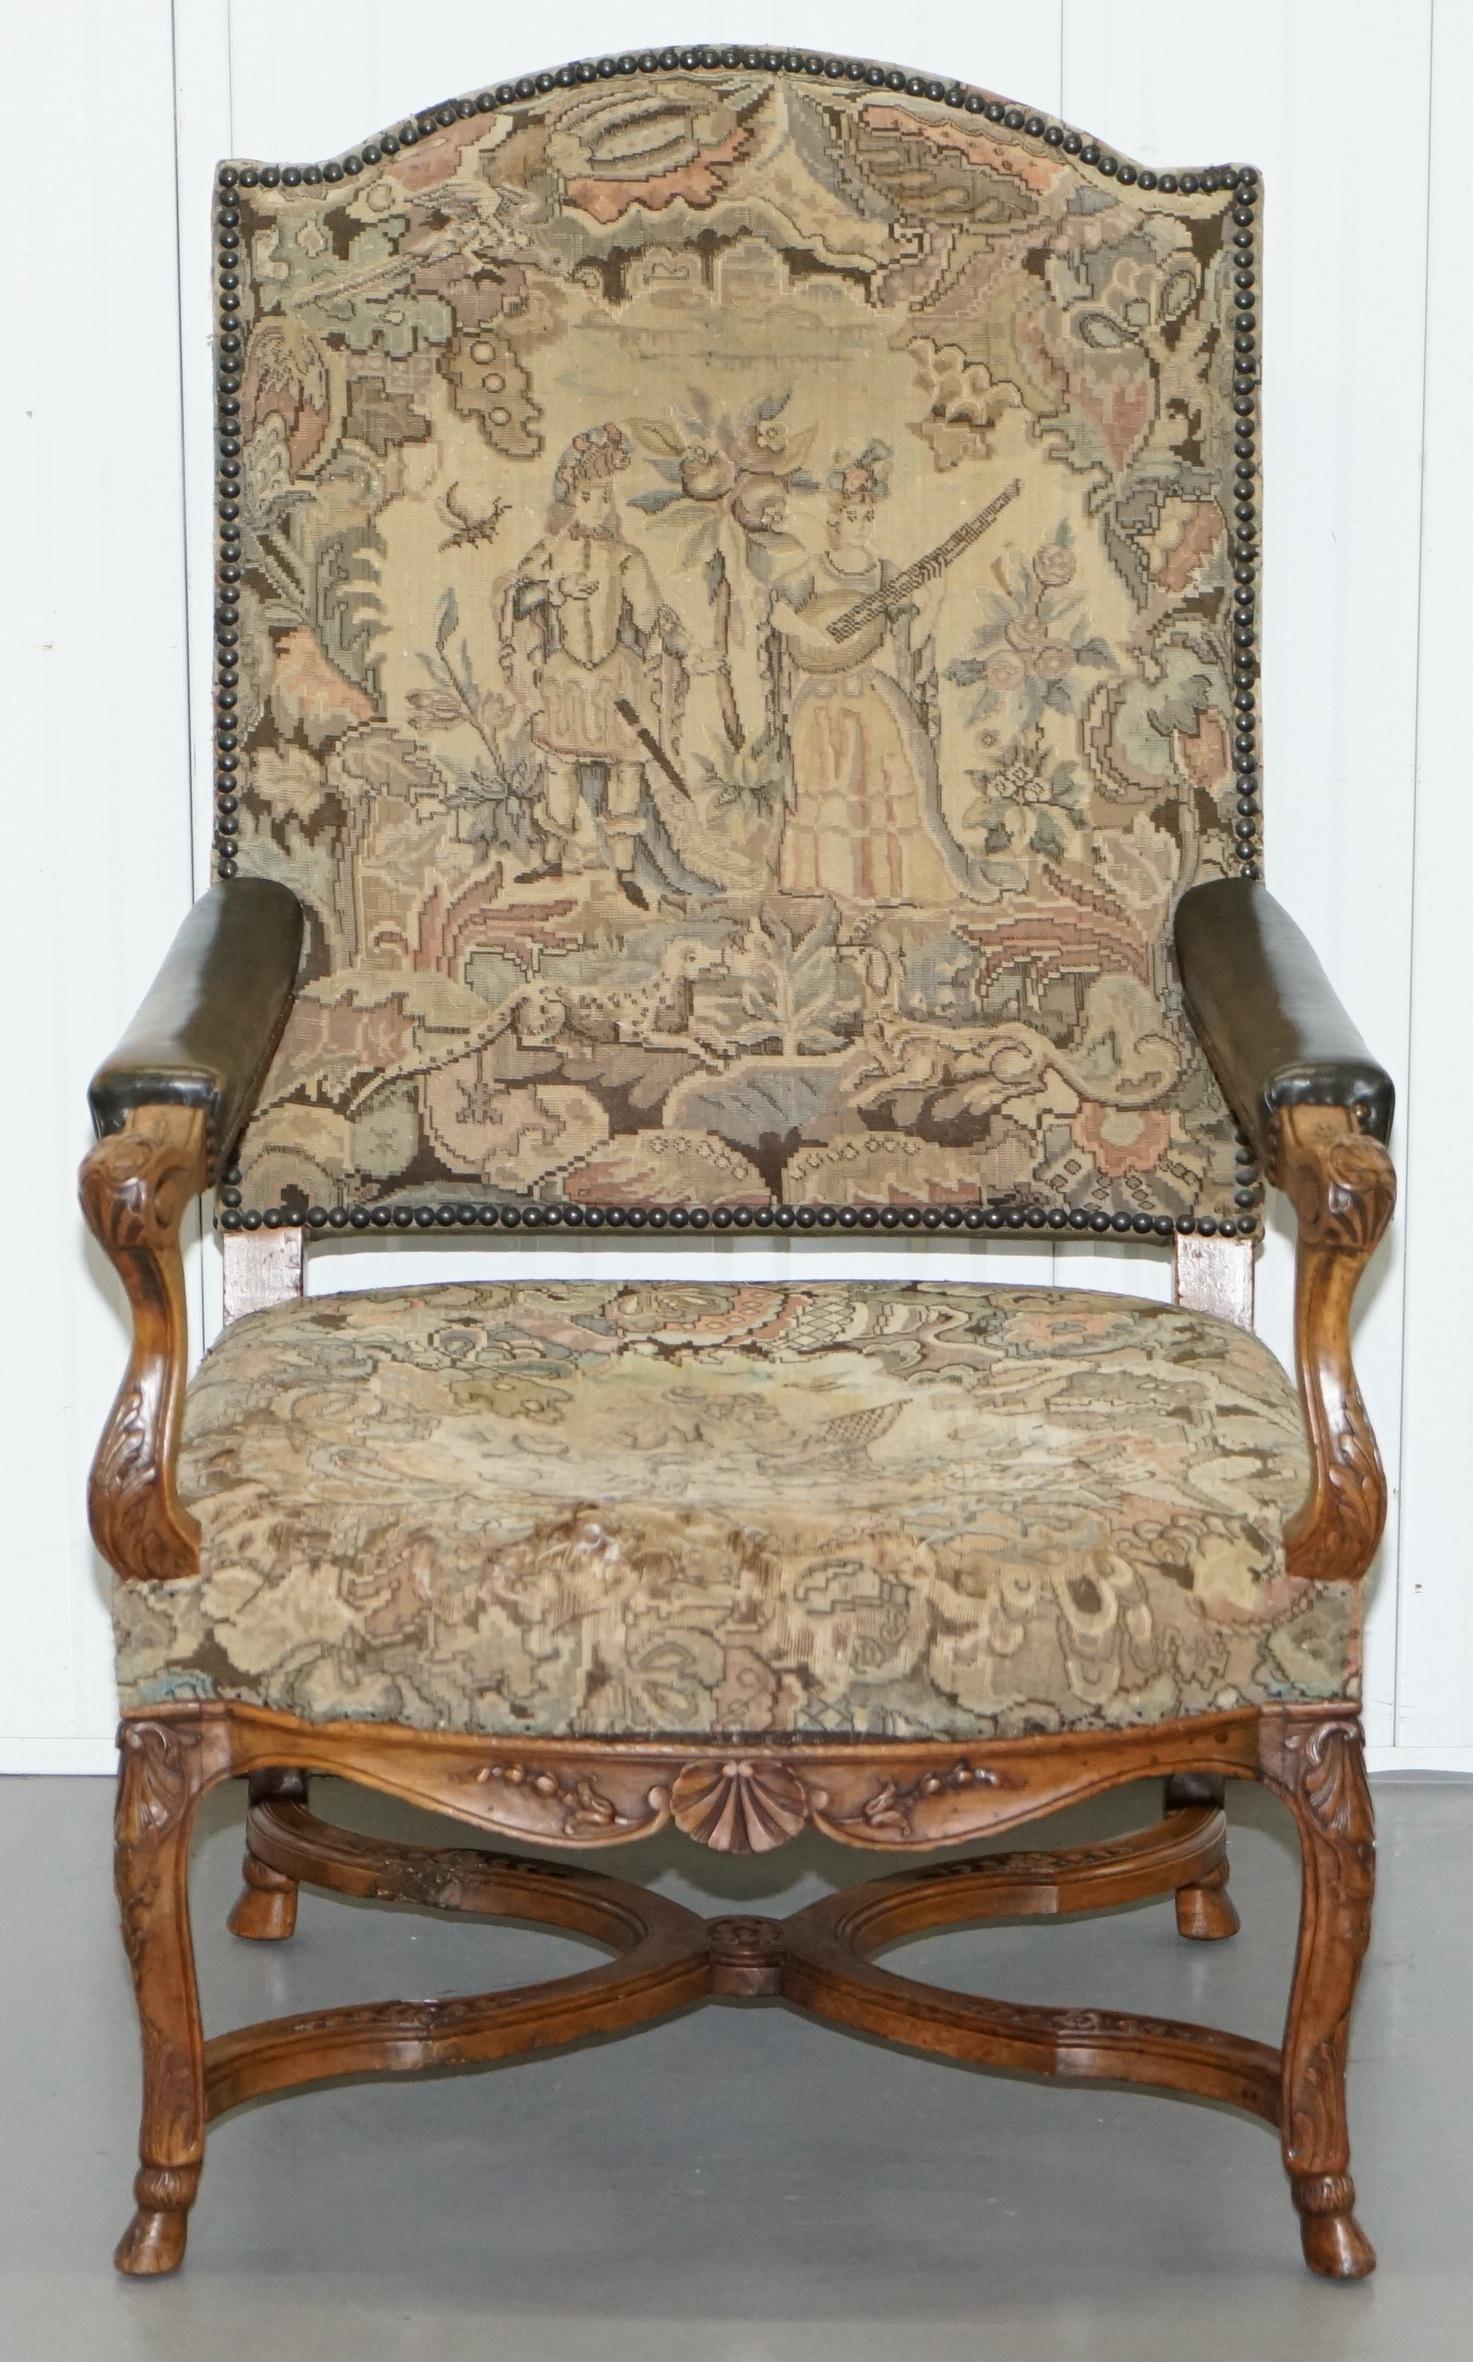 We are delighted to offer for this stunning hand made in France Embroidered carver armchair with carved frame

An extremely decorative and well made armchair, the carving is exquisite, just look at the end of the arms, the base splat has a very